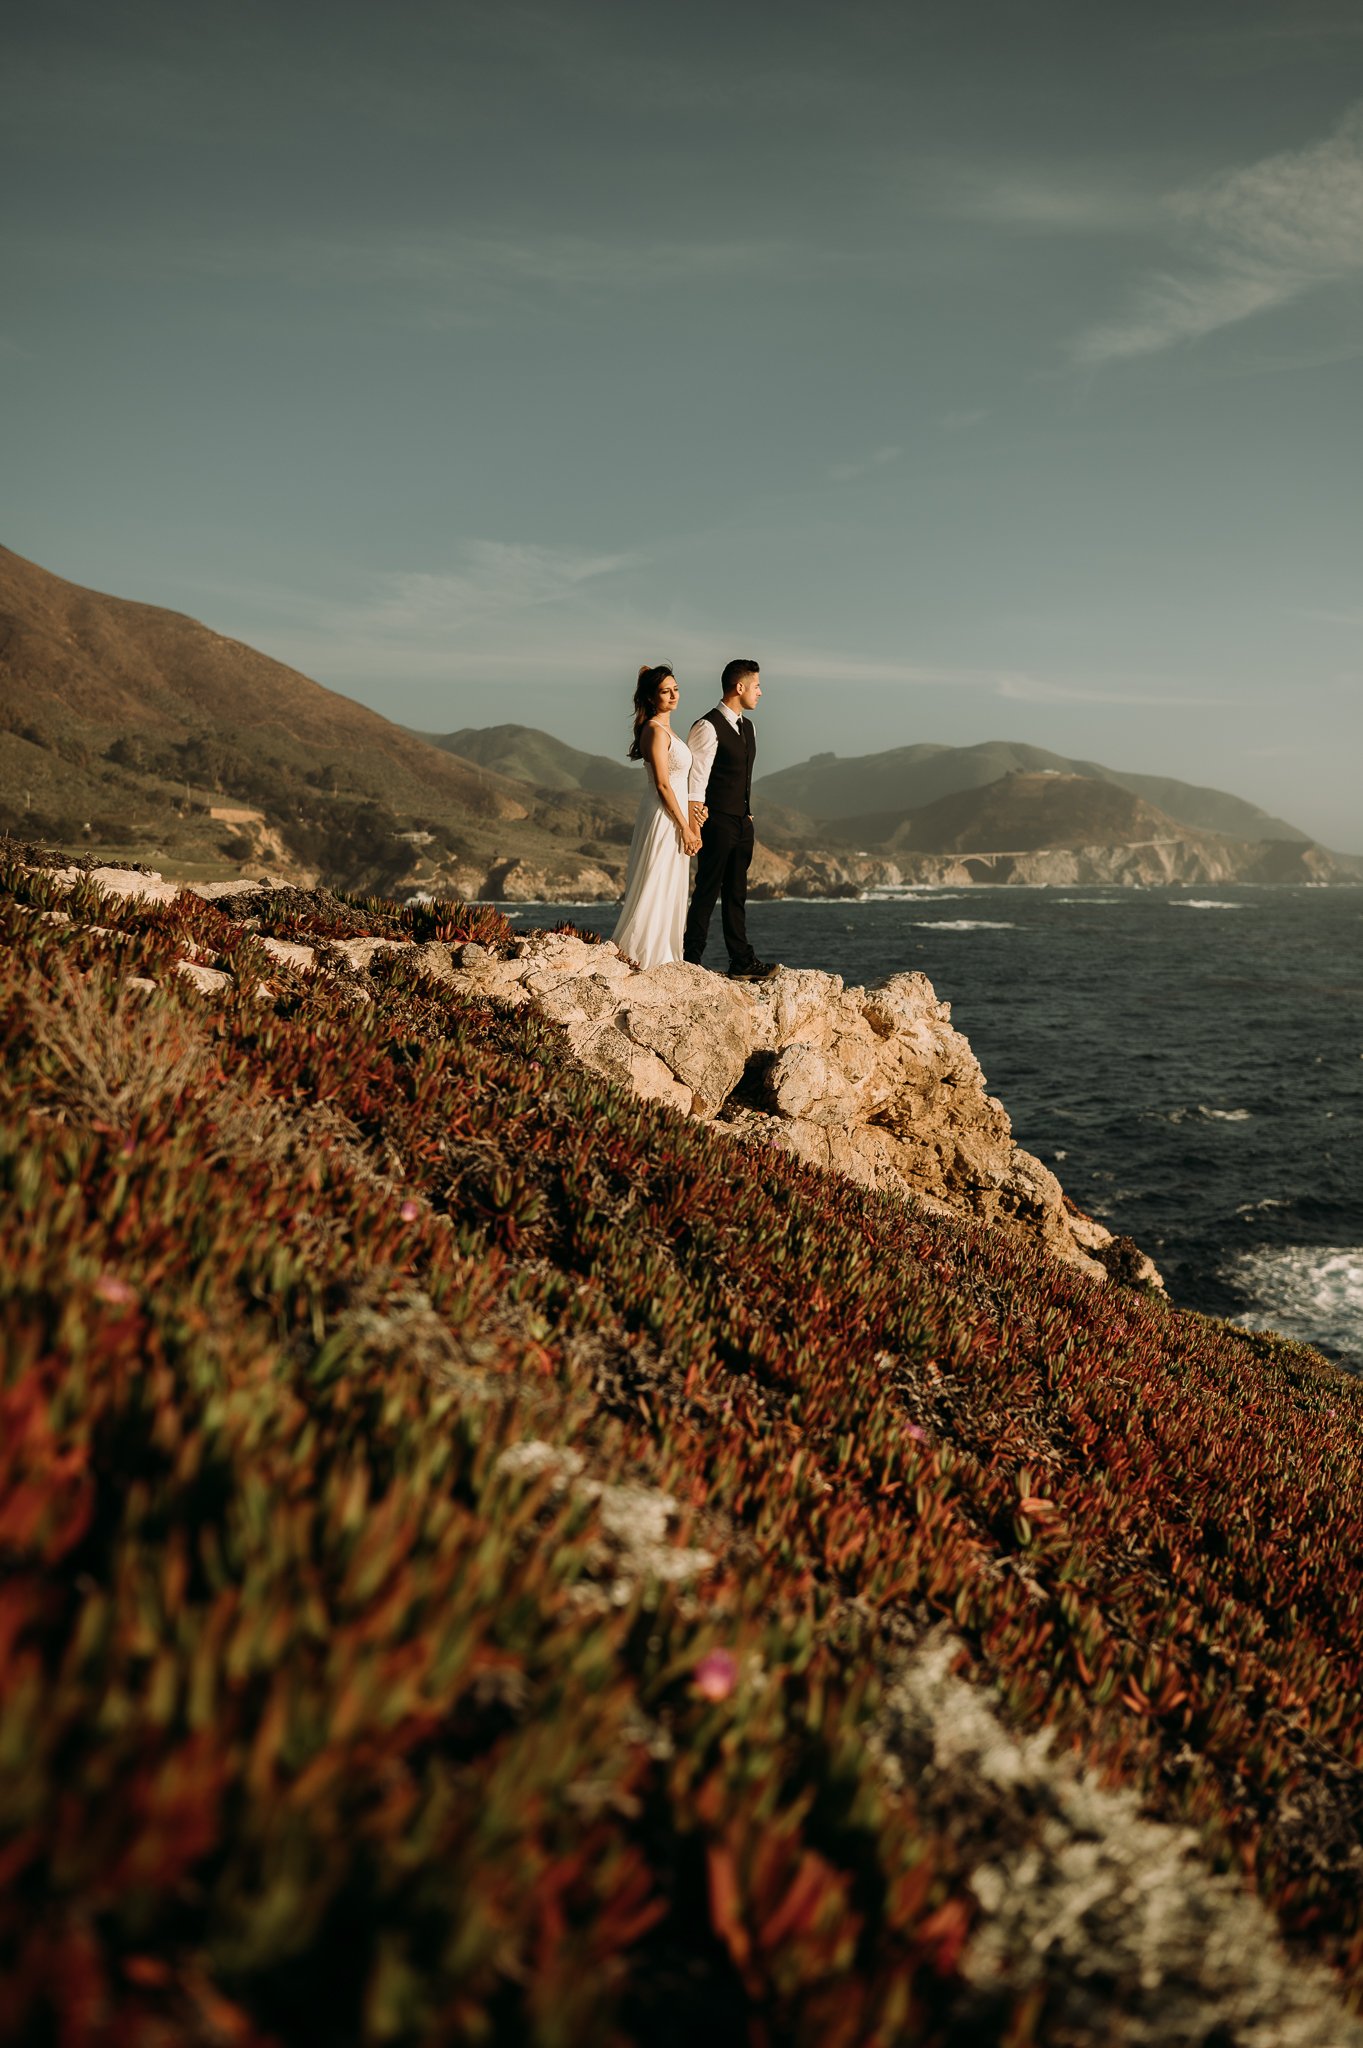 Couple dressed in wedding attire on cliffs to pose for photo Big Sur